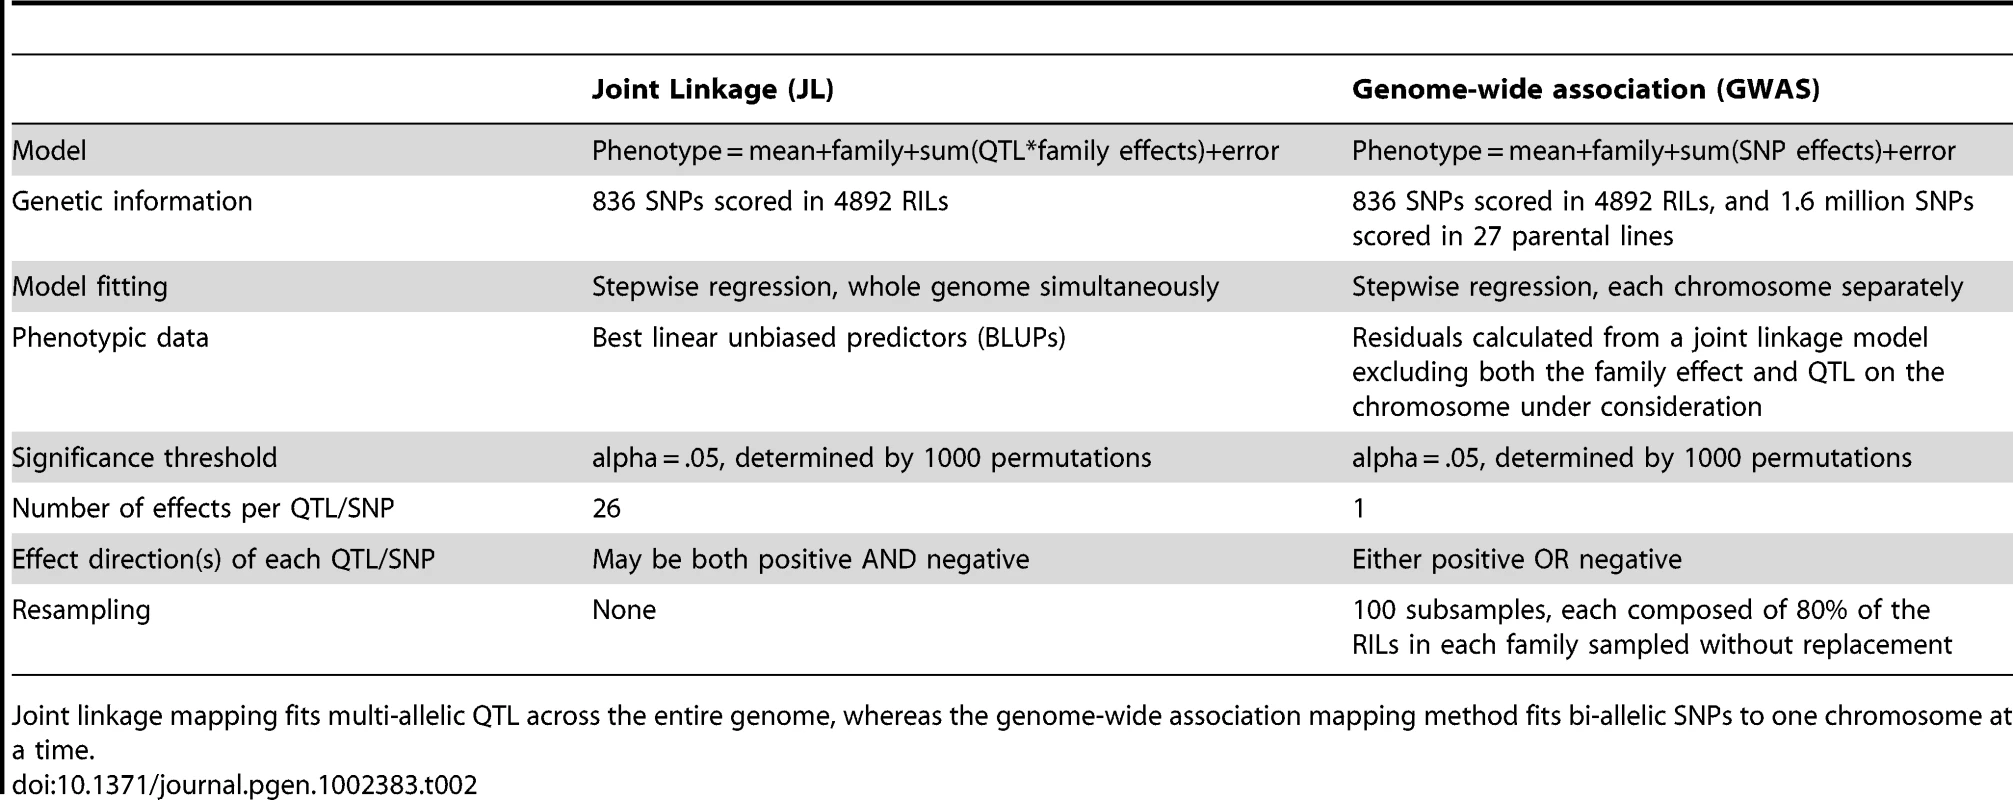 Comparison of the two methods used for genetic analysis.